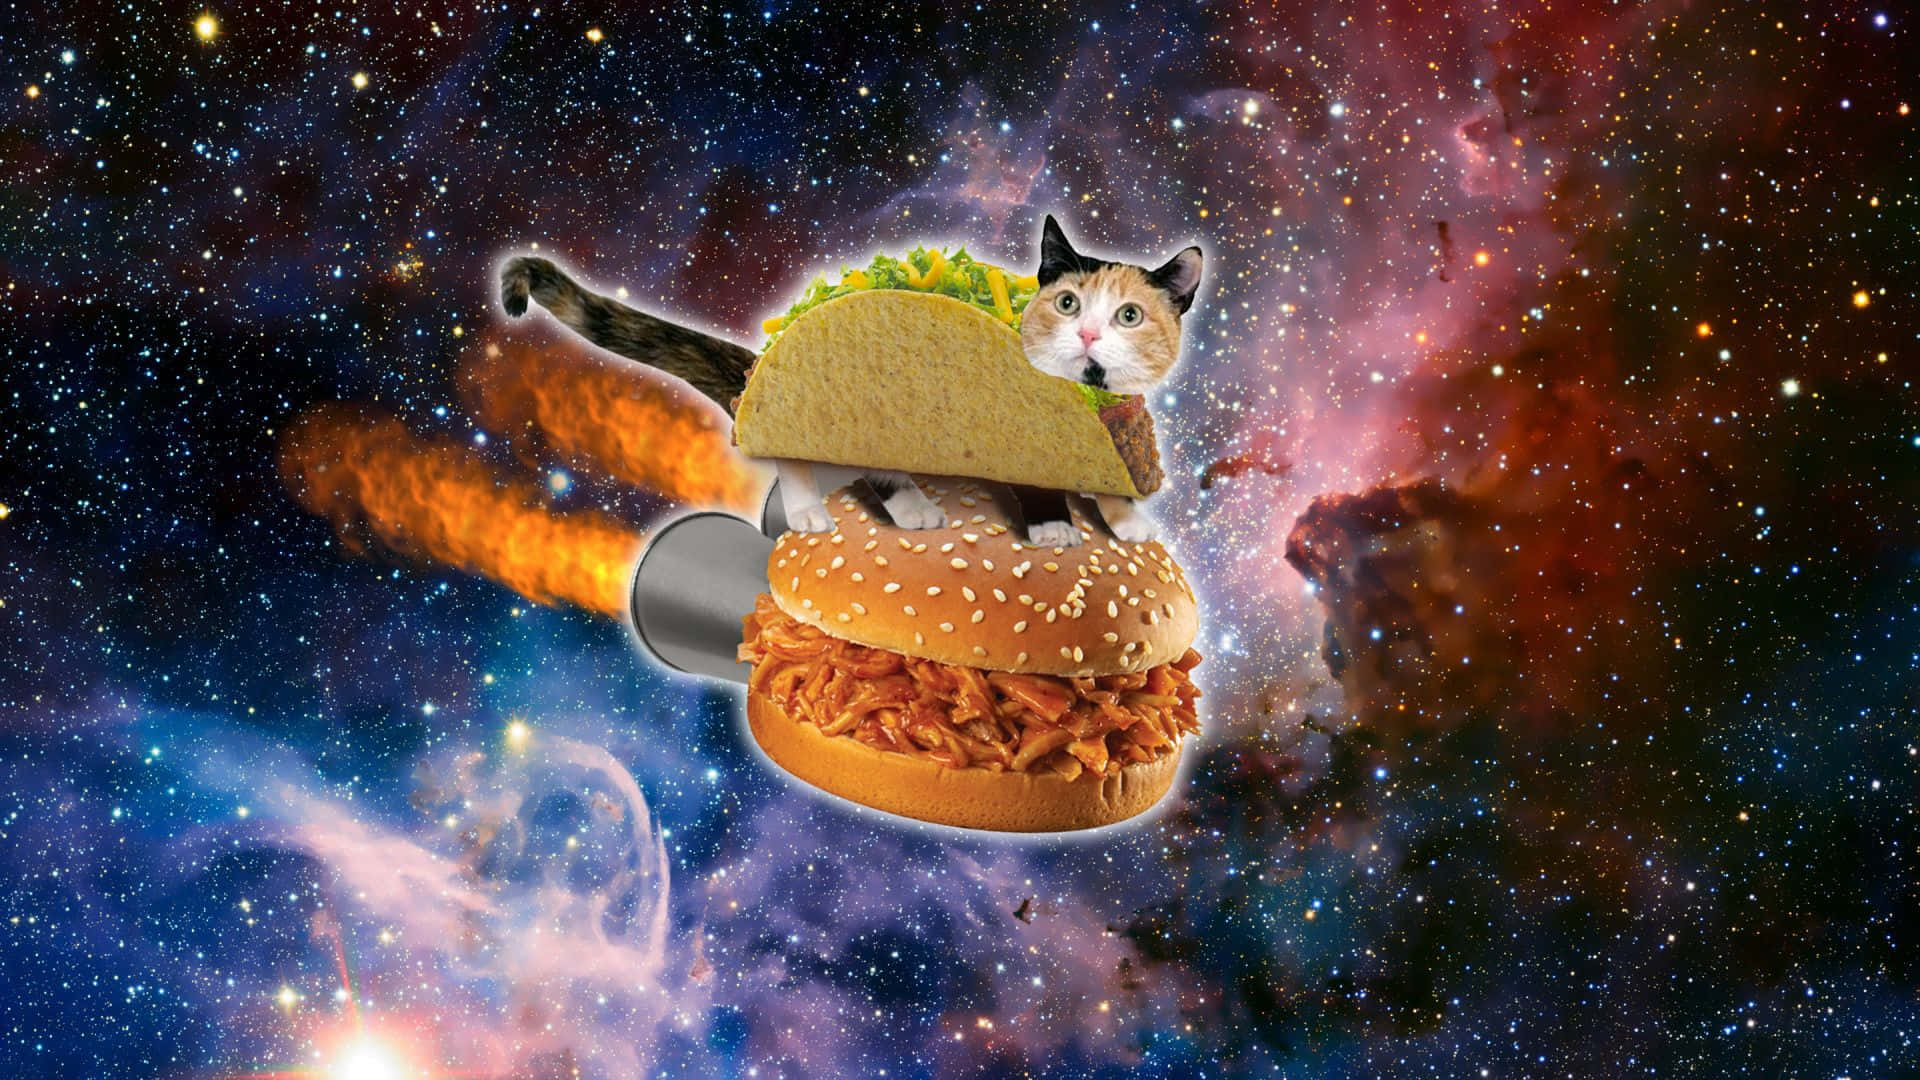 A Cat Is Flying In Space With A Taco In The Sky Wallpaper